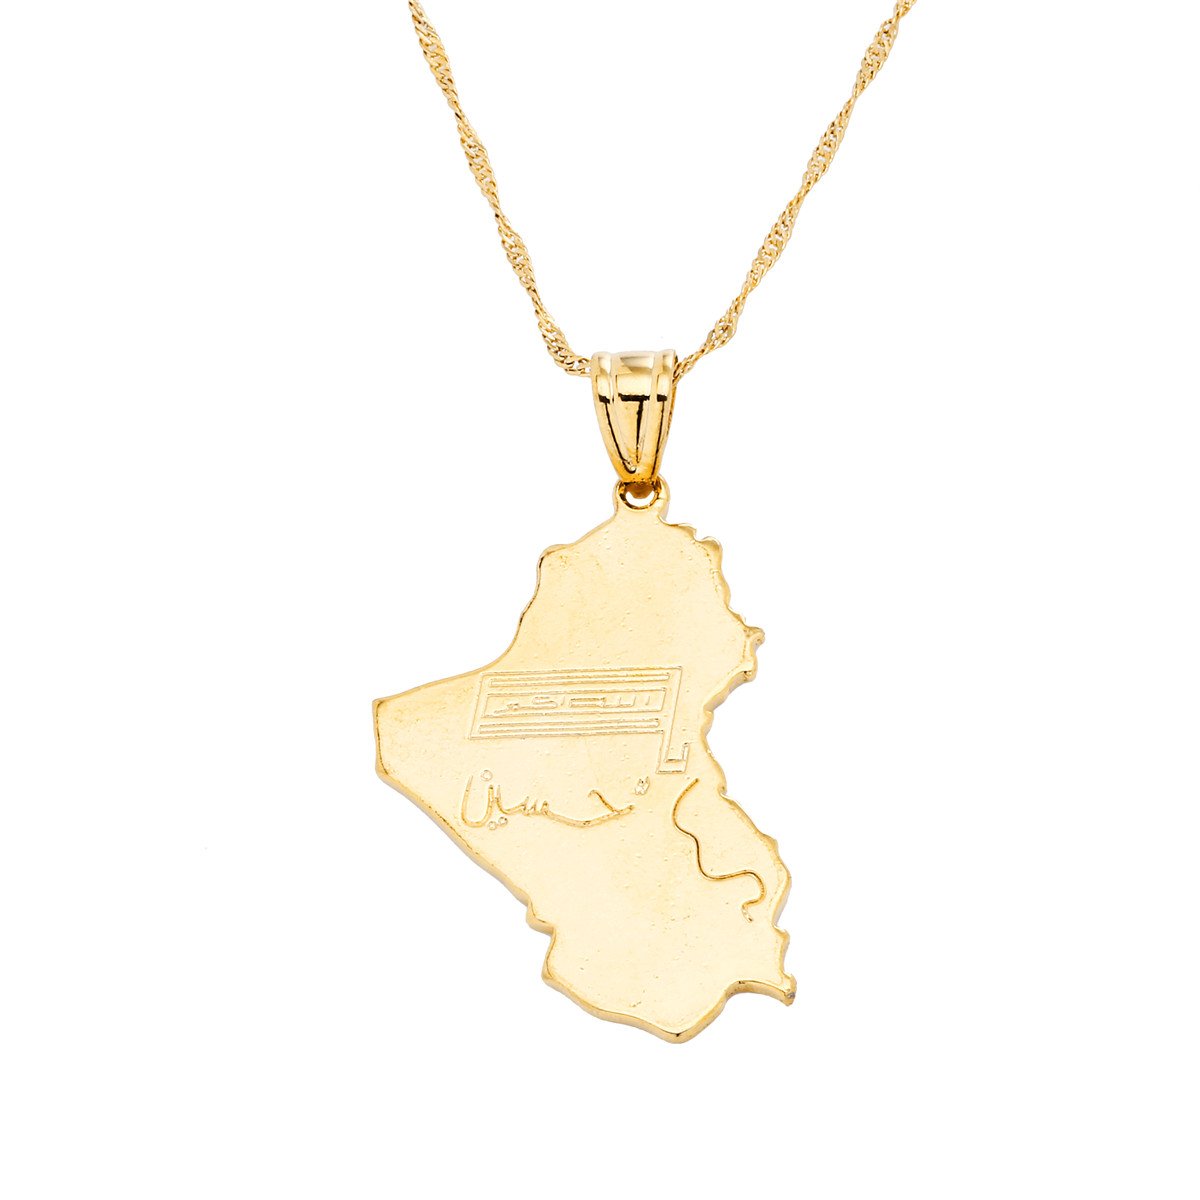 Republic of Iraq National Flag/Map 18K Gold Plated Pendant Necklace Chain Jewelry